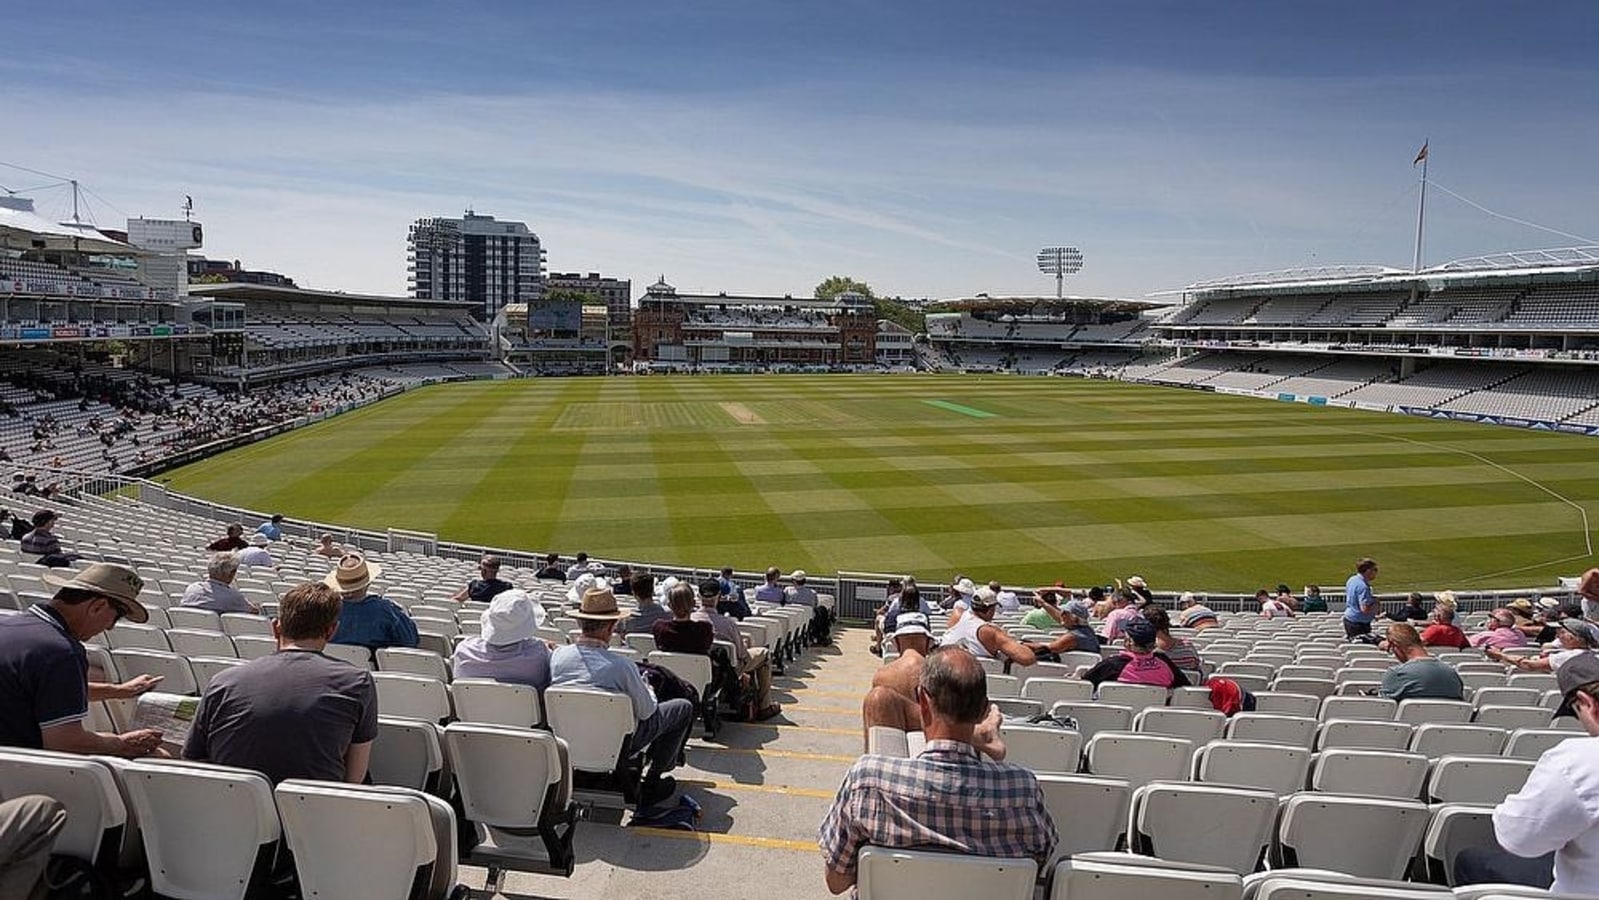 England vs Pakistan ODI at Lord's to be played amid a full capacity